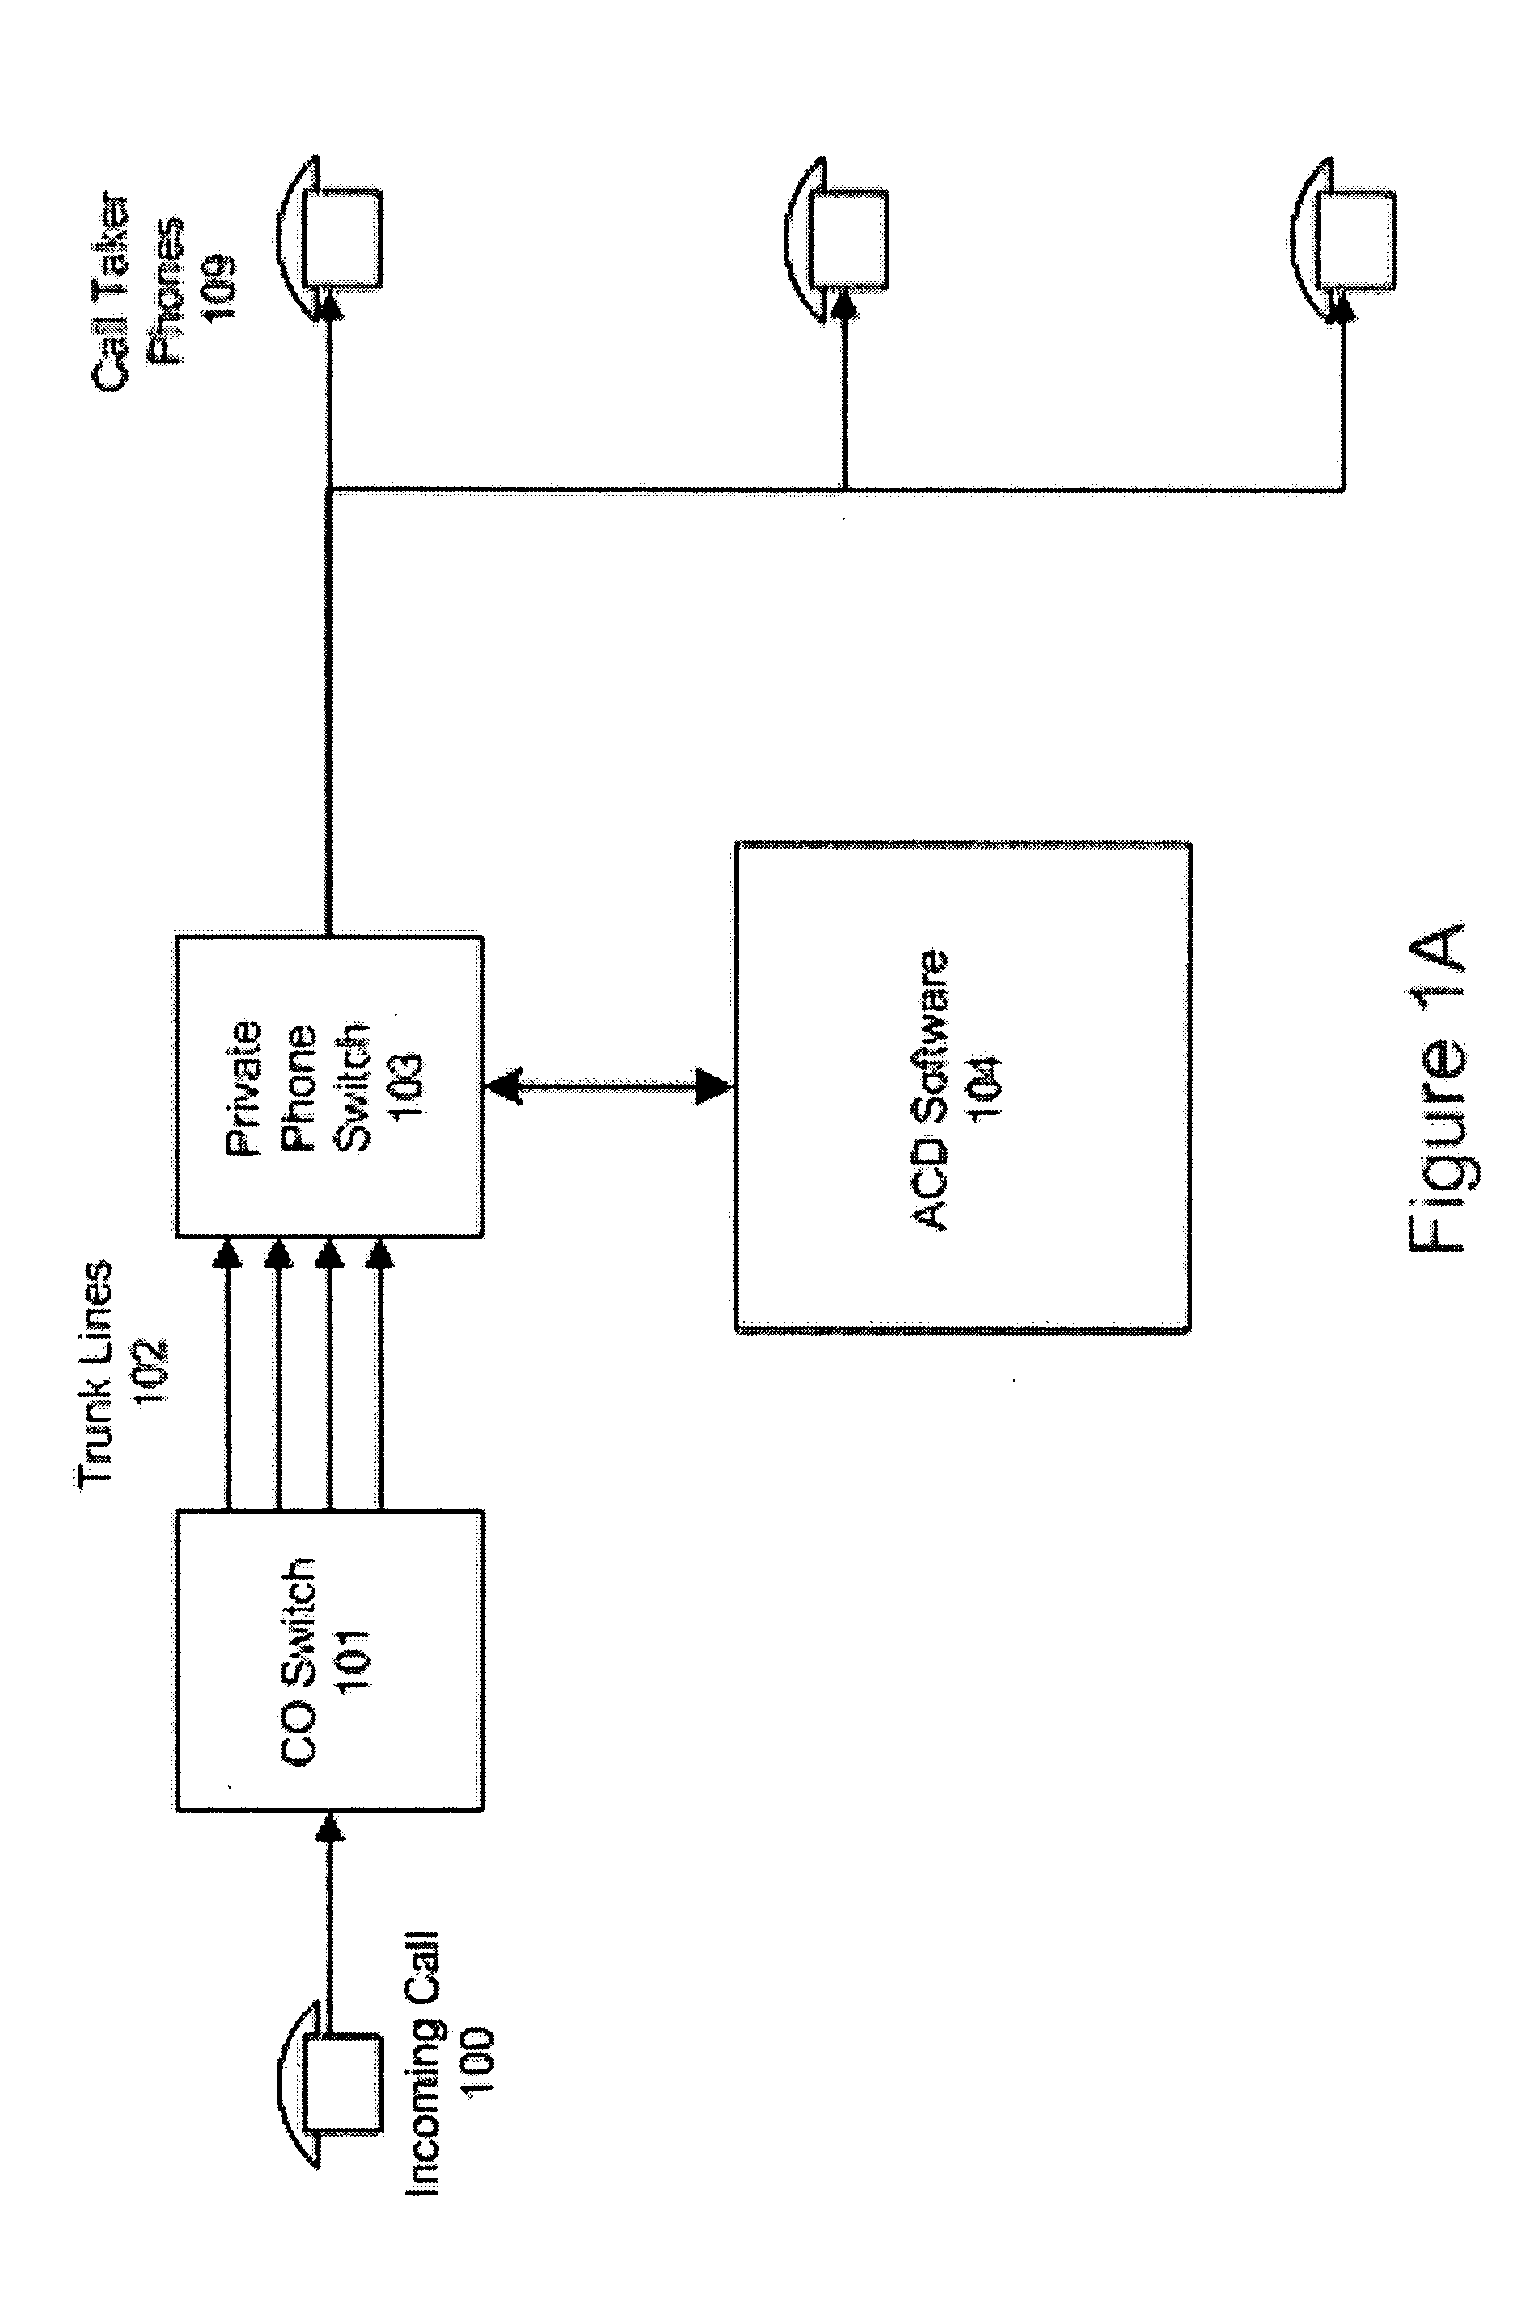 Computer-telephony integration (CTI) system for controlling an automatic call distribution system using a bidirectional CTI model